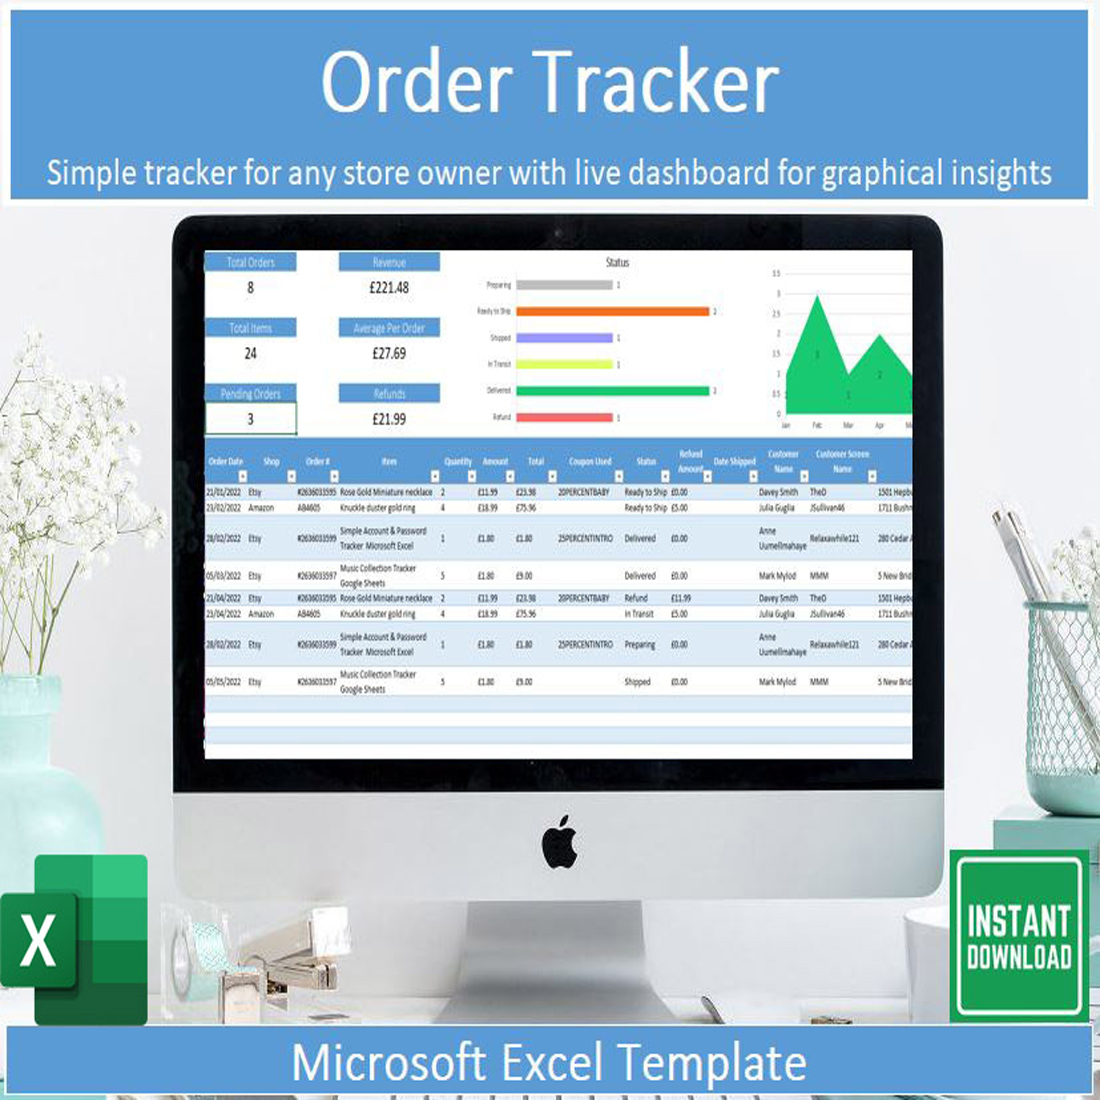 Order Tracker Spreadsheet Template for Microsoft Excel main cover.